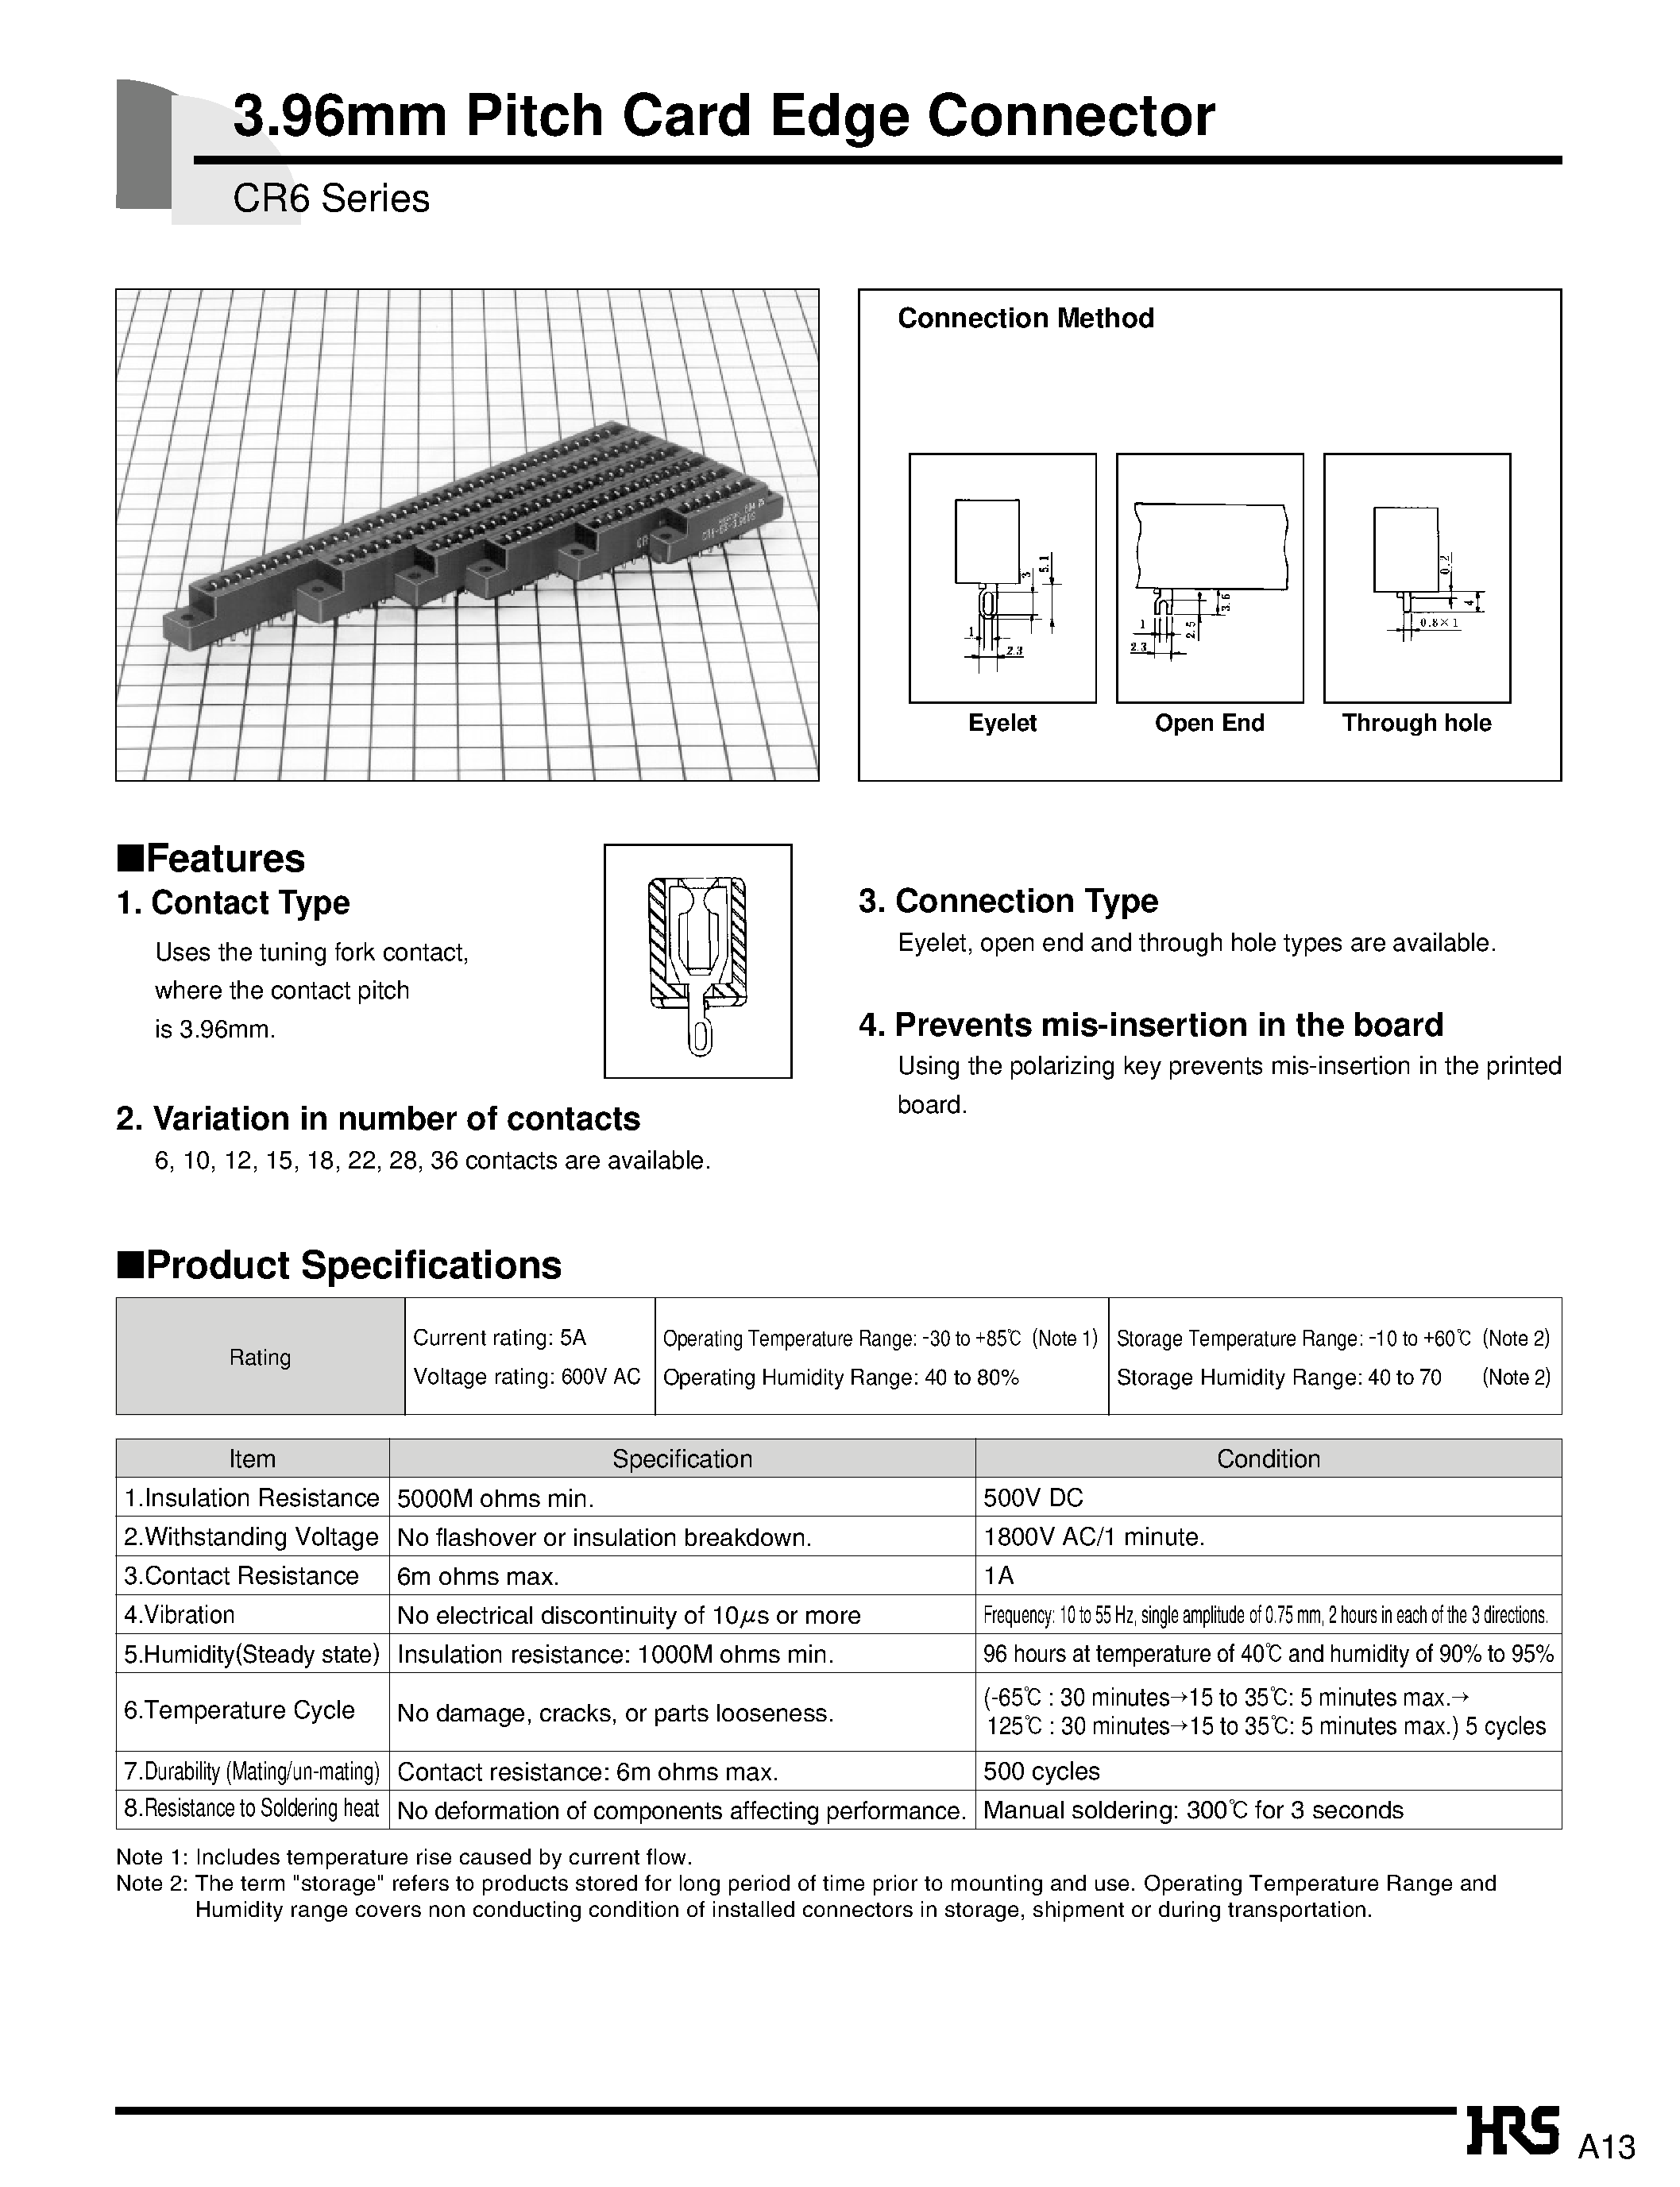 Datasheet CR6-12S-3.96DS - 3.96mm Pitch Card Edge Connector page 1